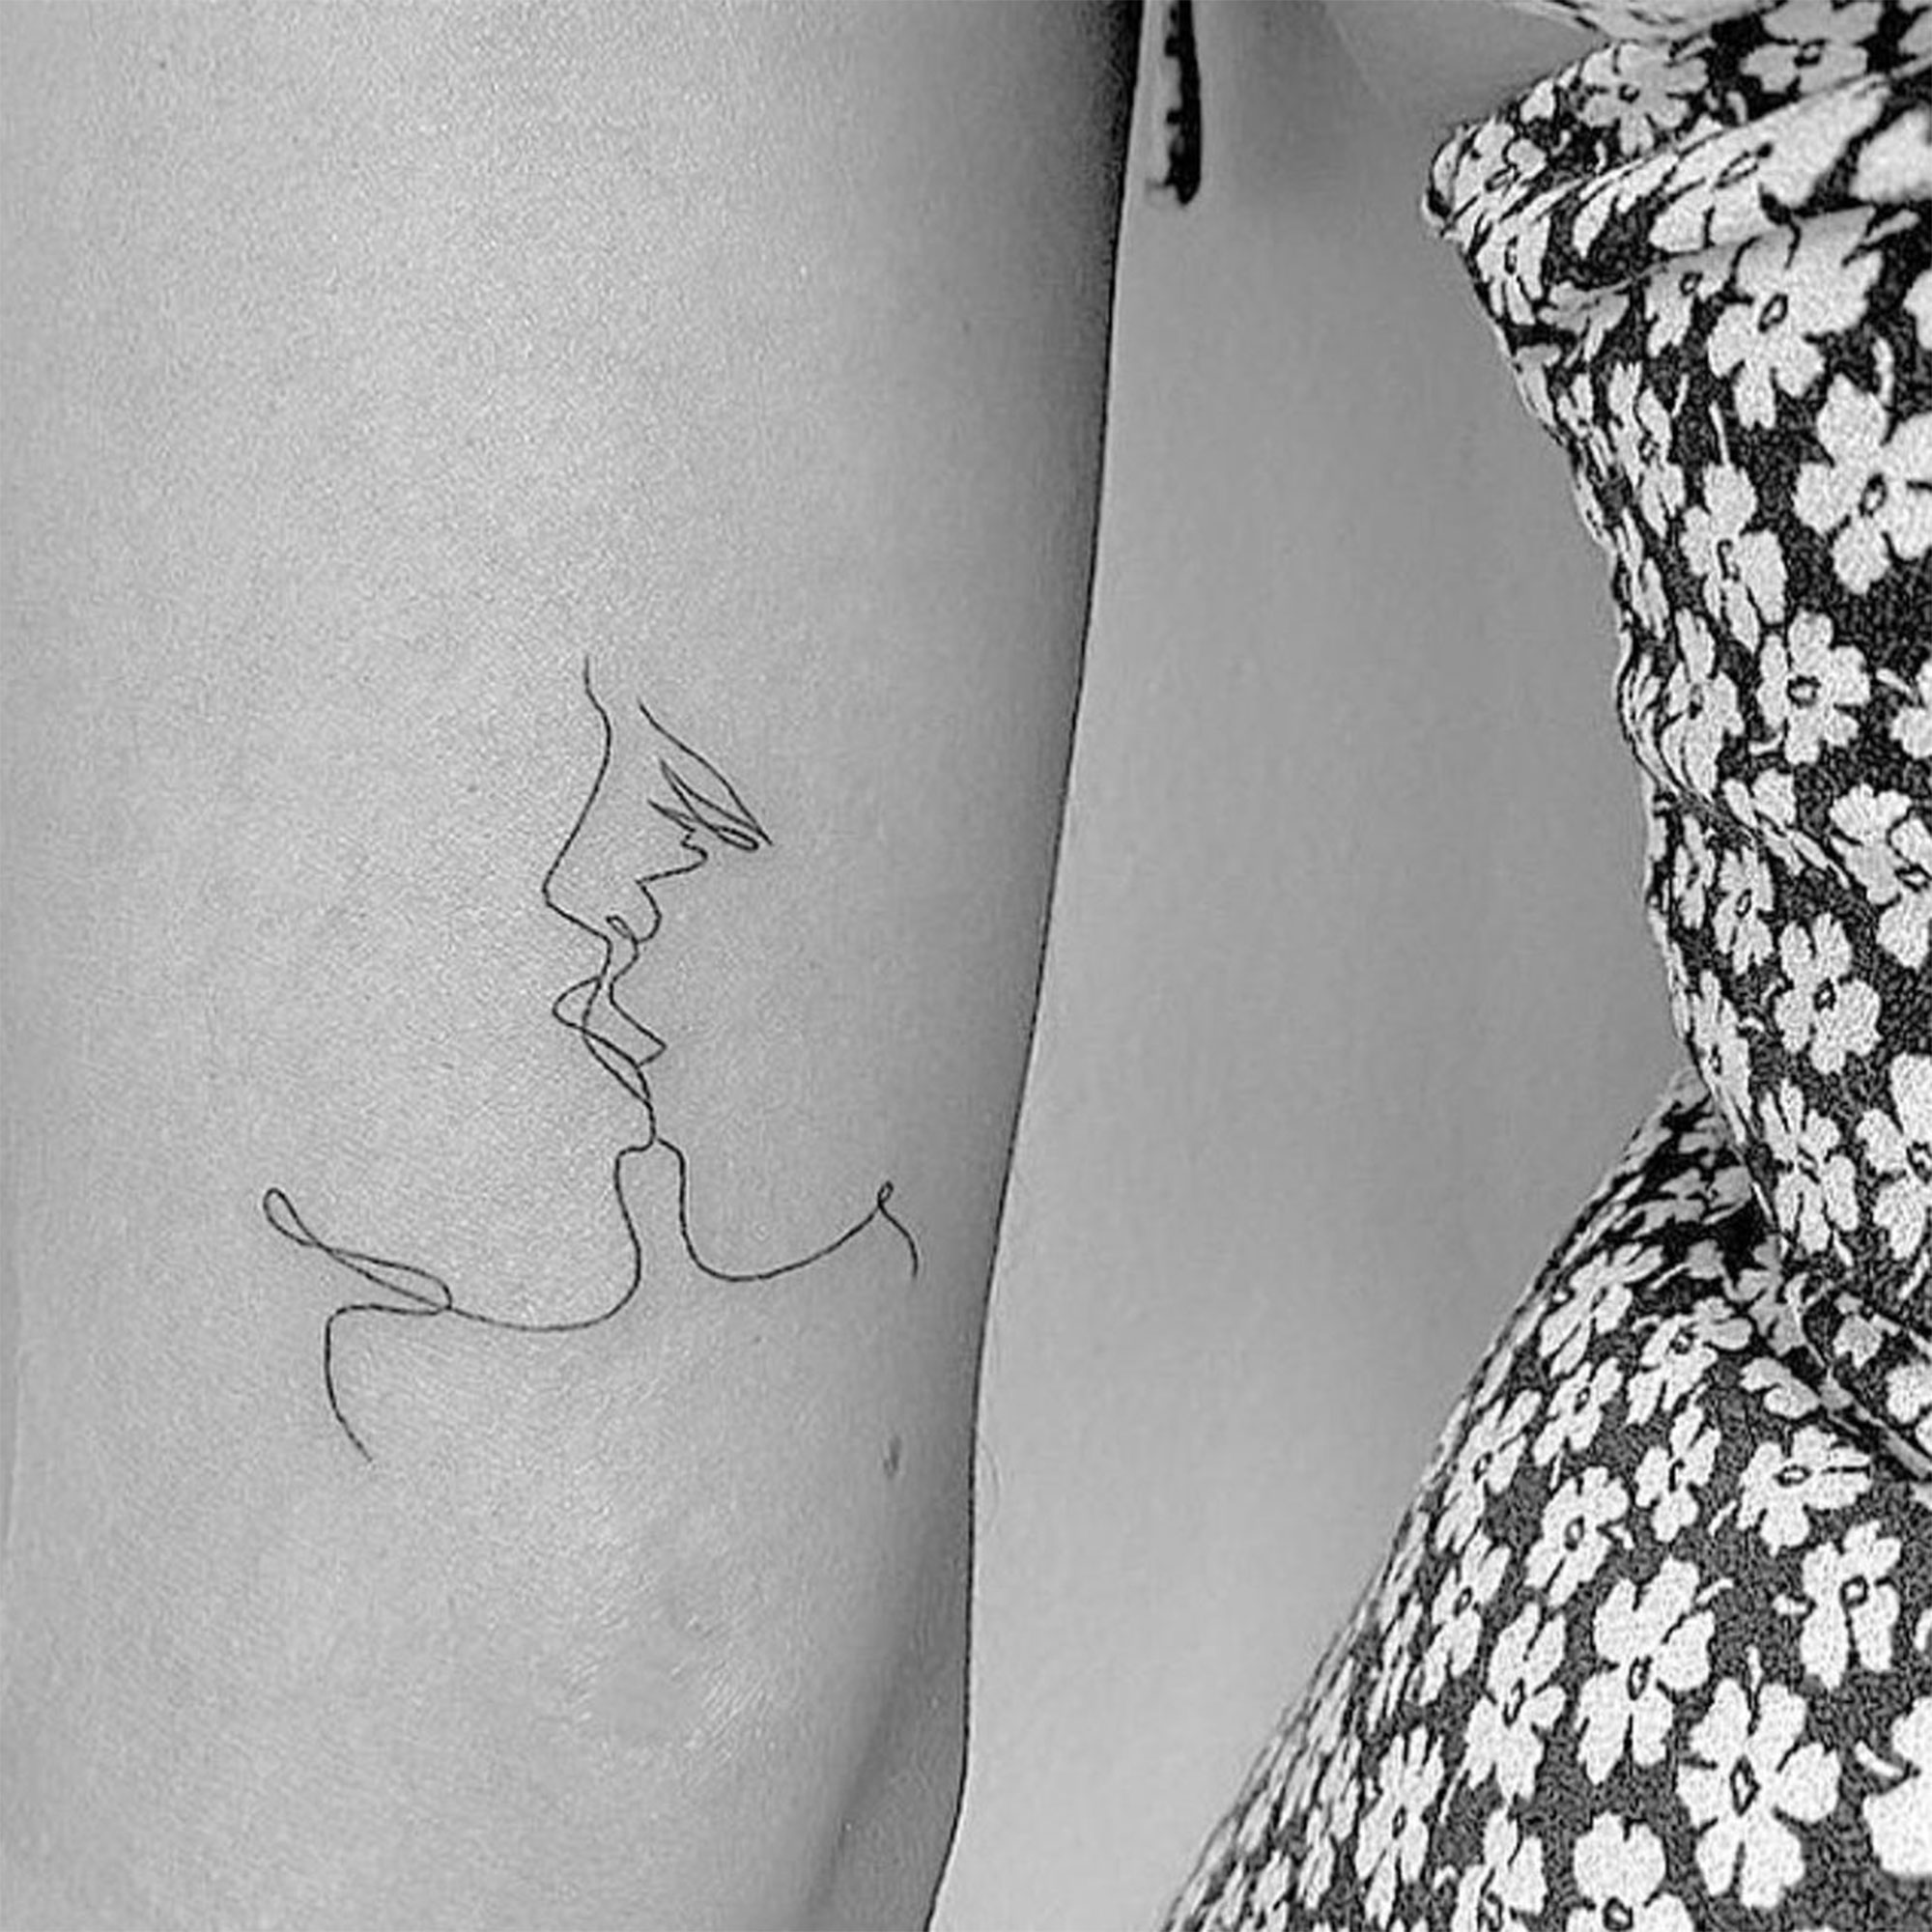 Wildflowers  Fine Line Tattoo on Instagram Delicate floral lady  silhouette for Felicia wildflowertattoo canadianflowers  blacklinetattoo silhouettetattoo